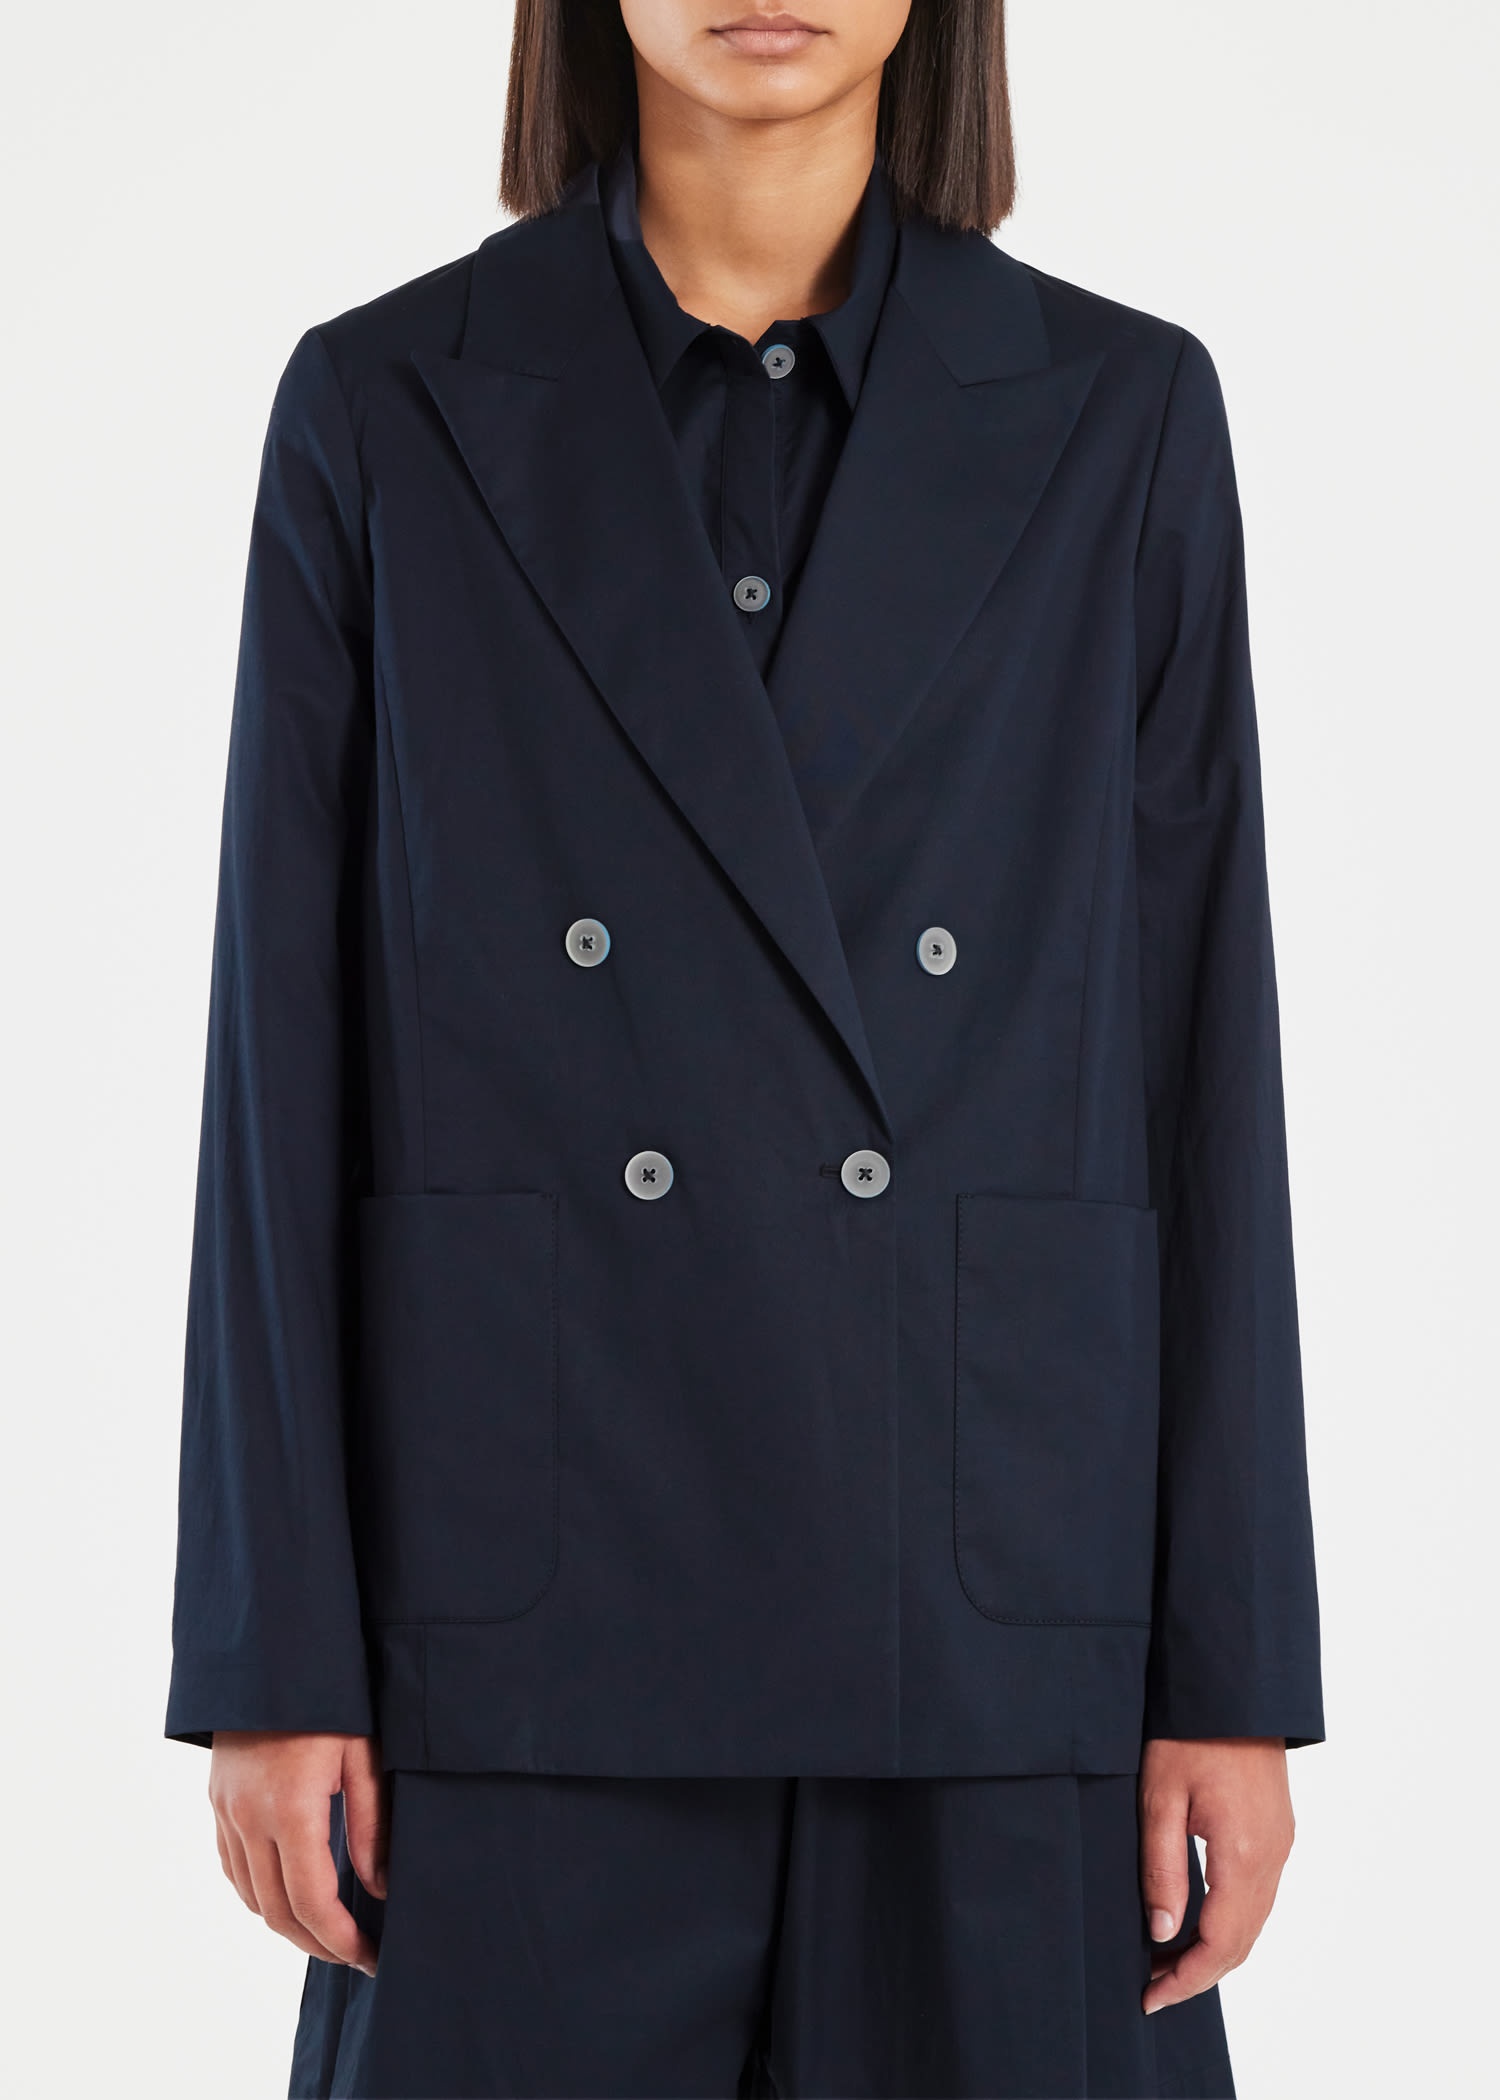 Navy Double Breasted Blazer - 5